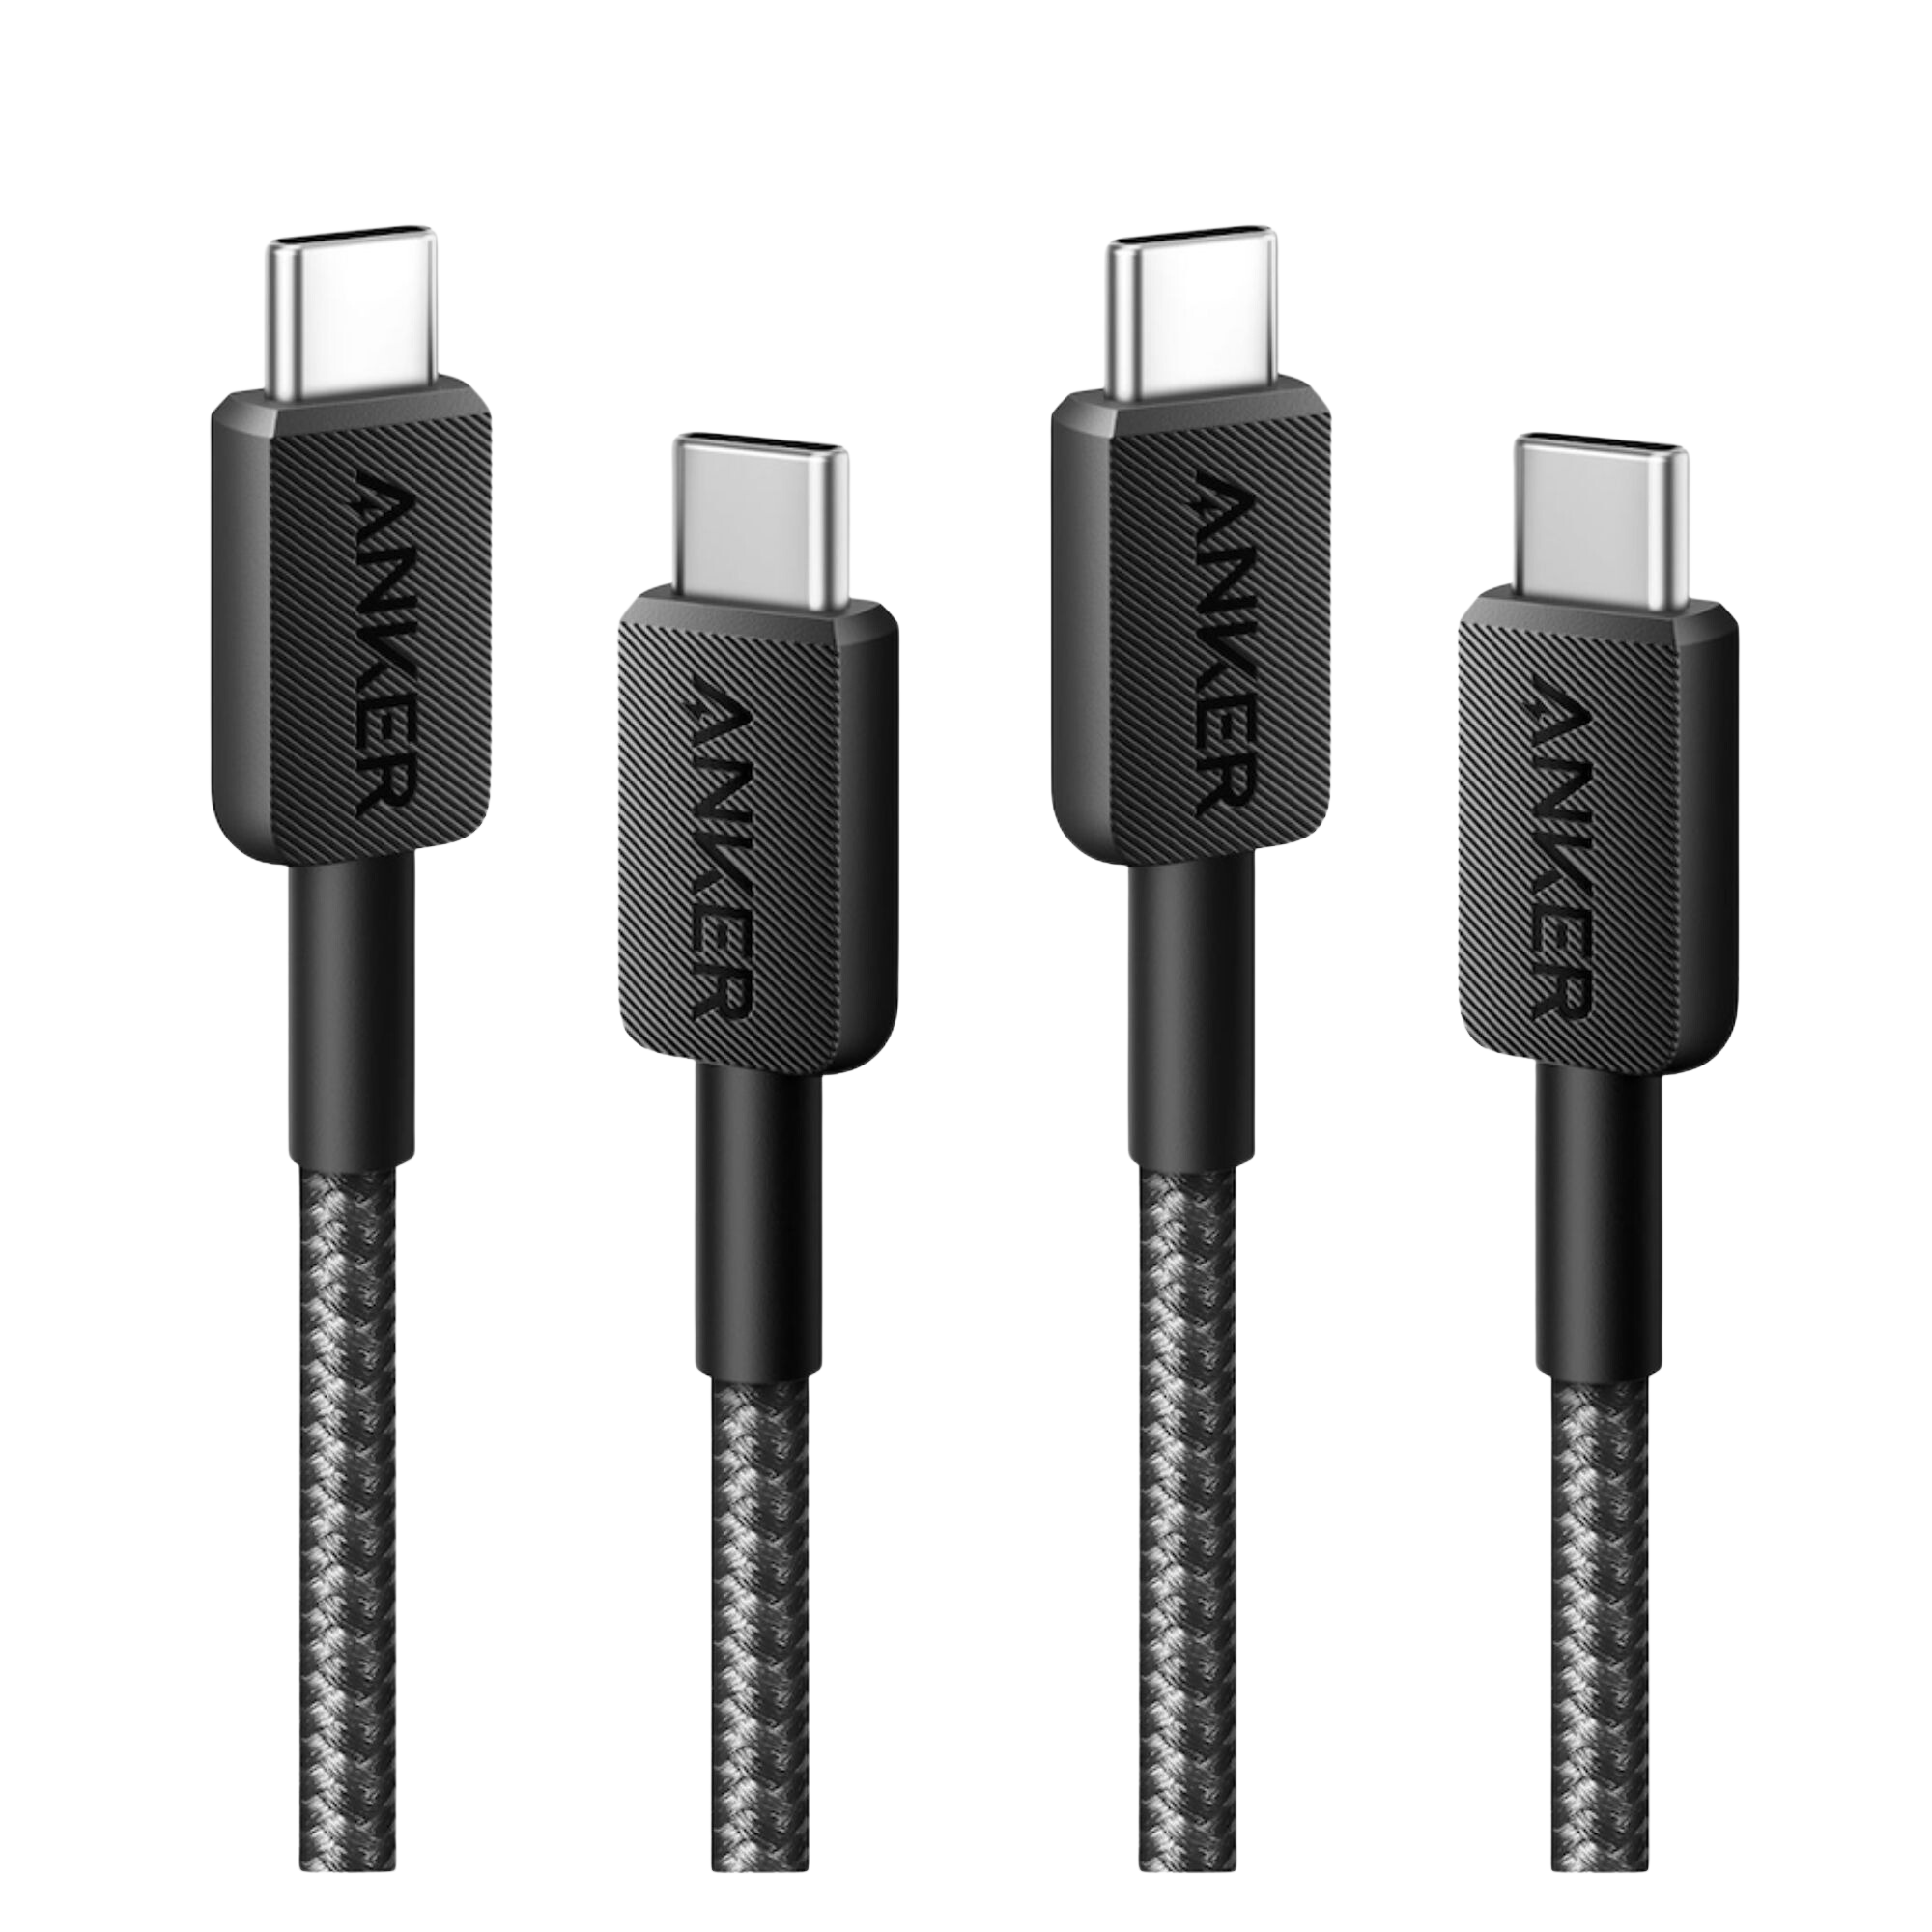 2 × Anker <b>322</b> USB-C to USB-C Cable